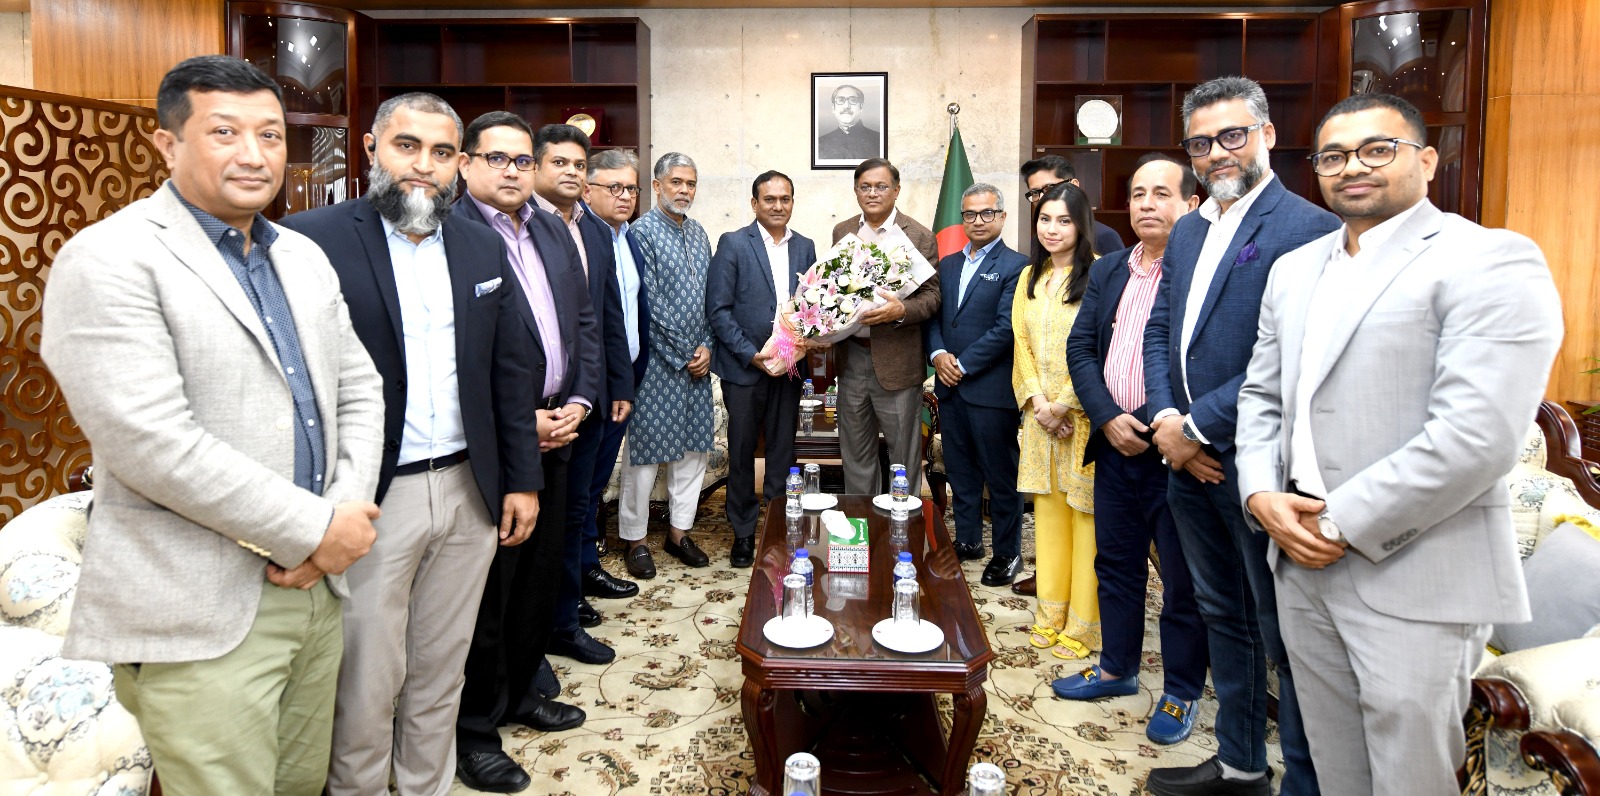 BGMEA seeks Foreign Ministry’s cooperation in product, market diversification for RMG sector